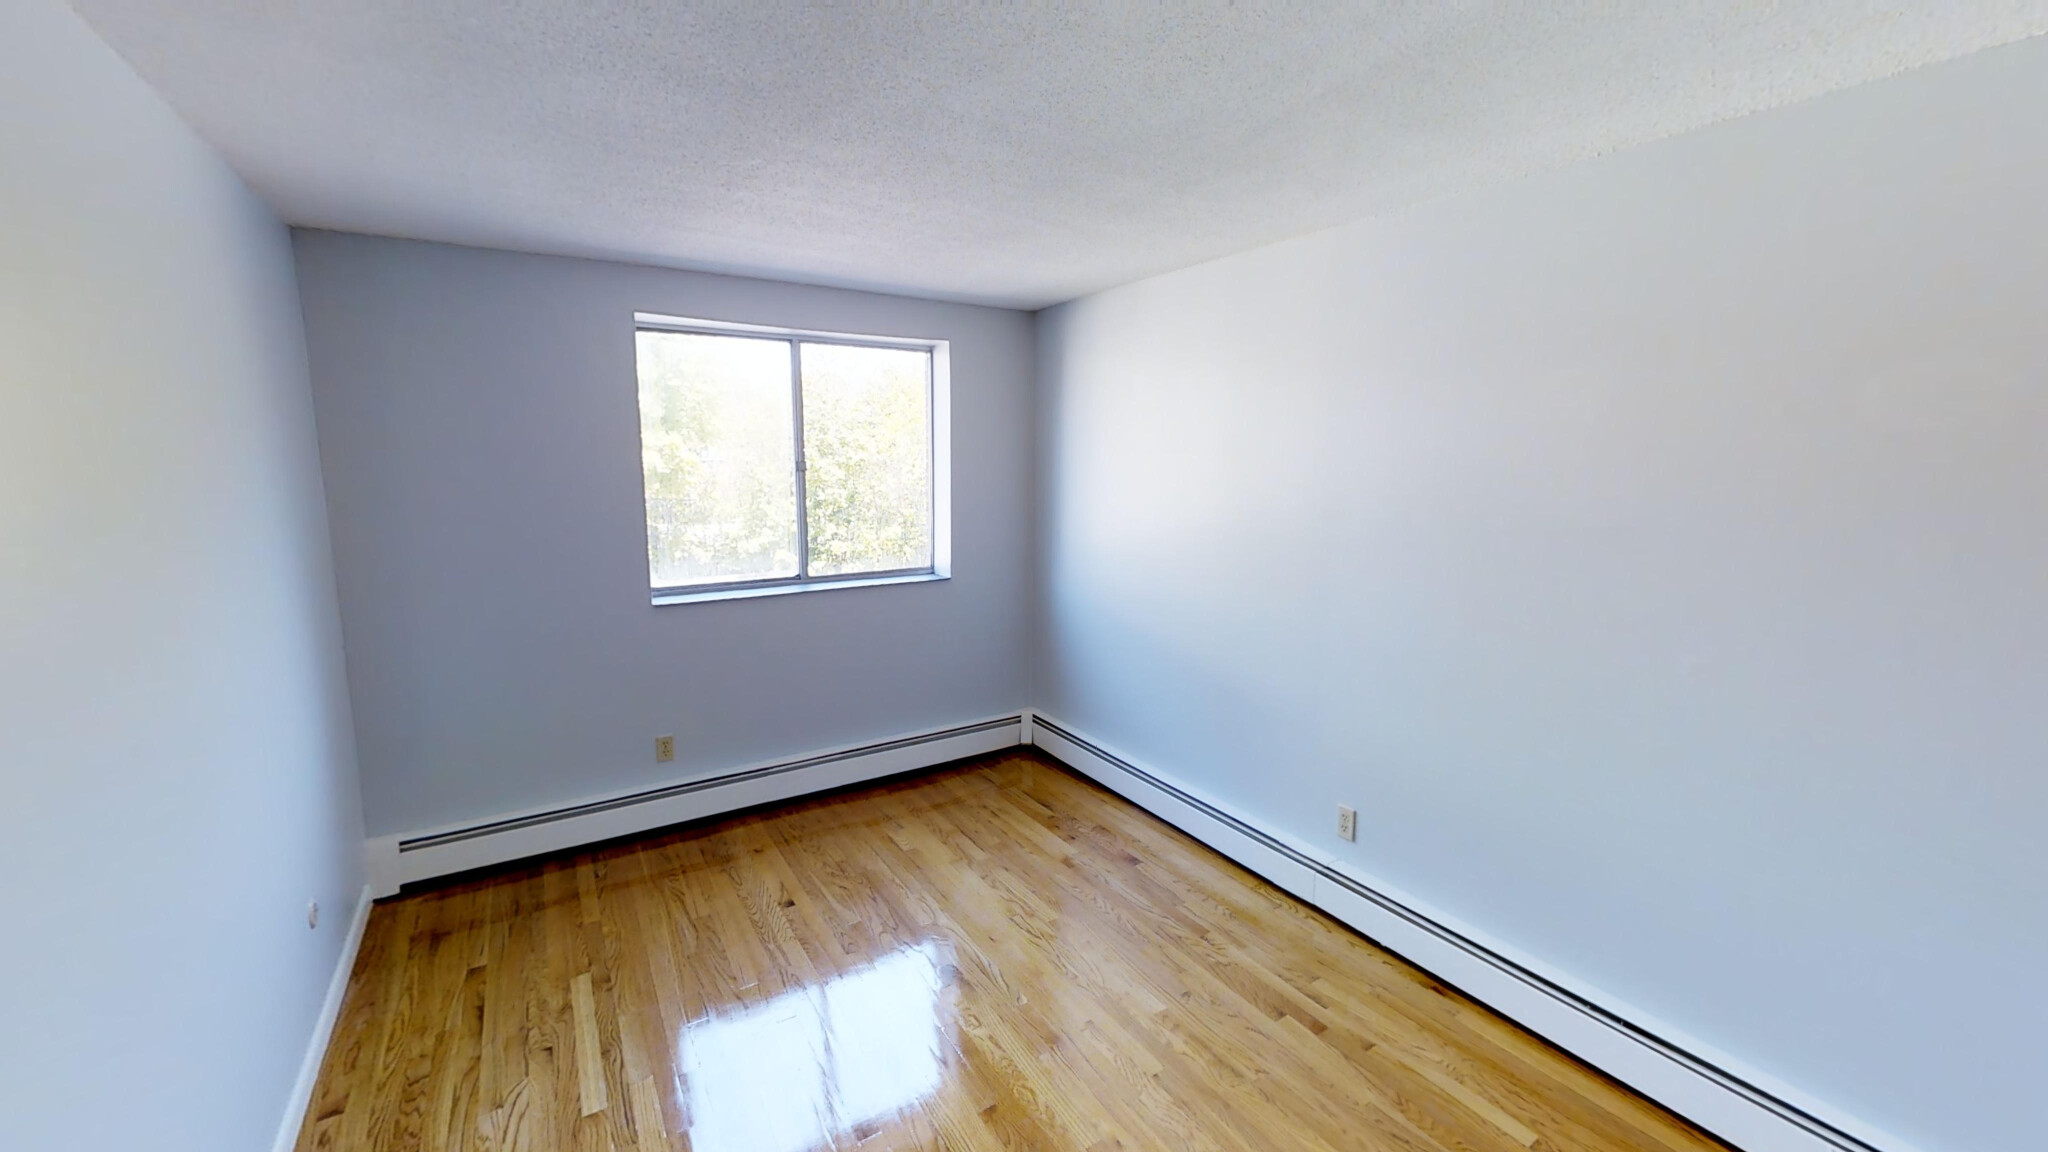 Photos of apartment on Murdock St.,Somerville MA 02145